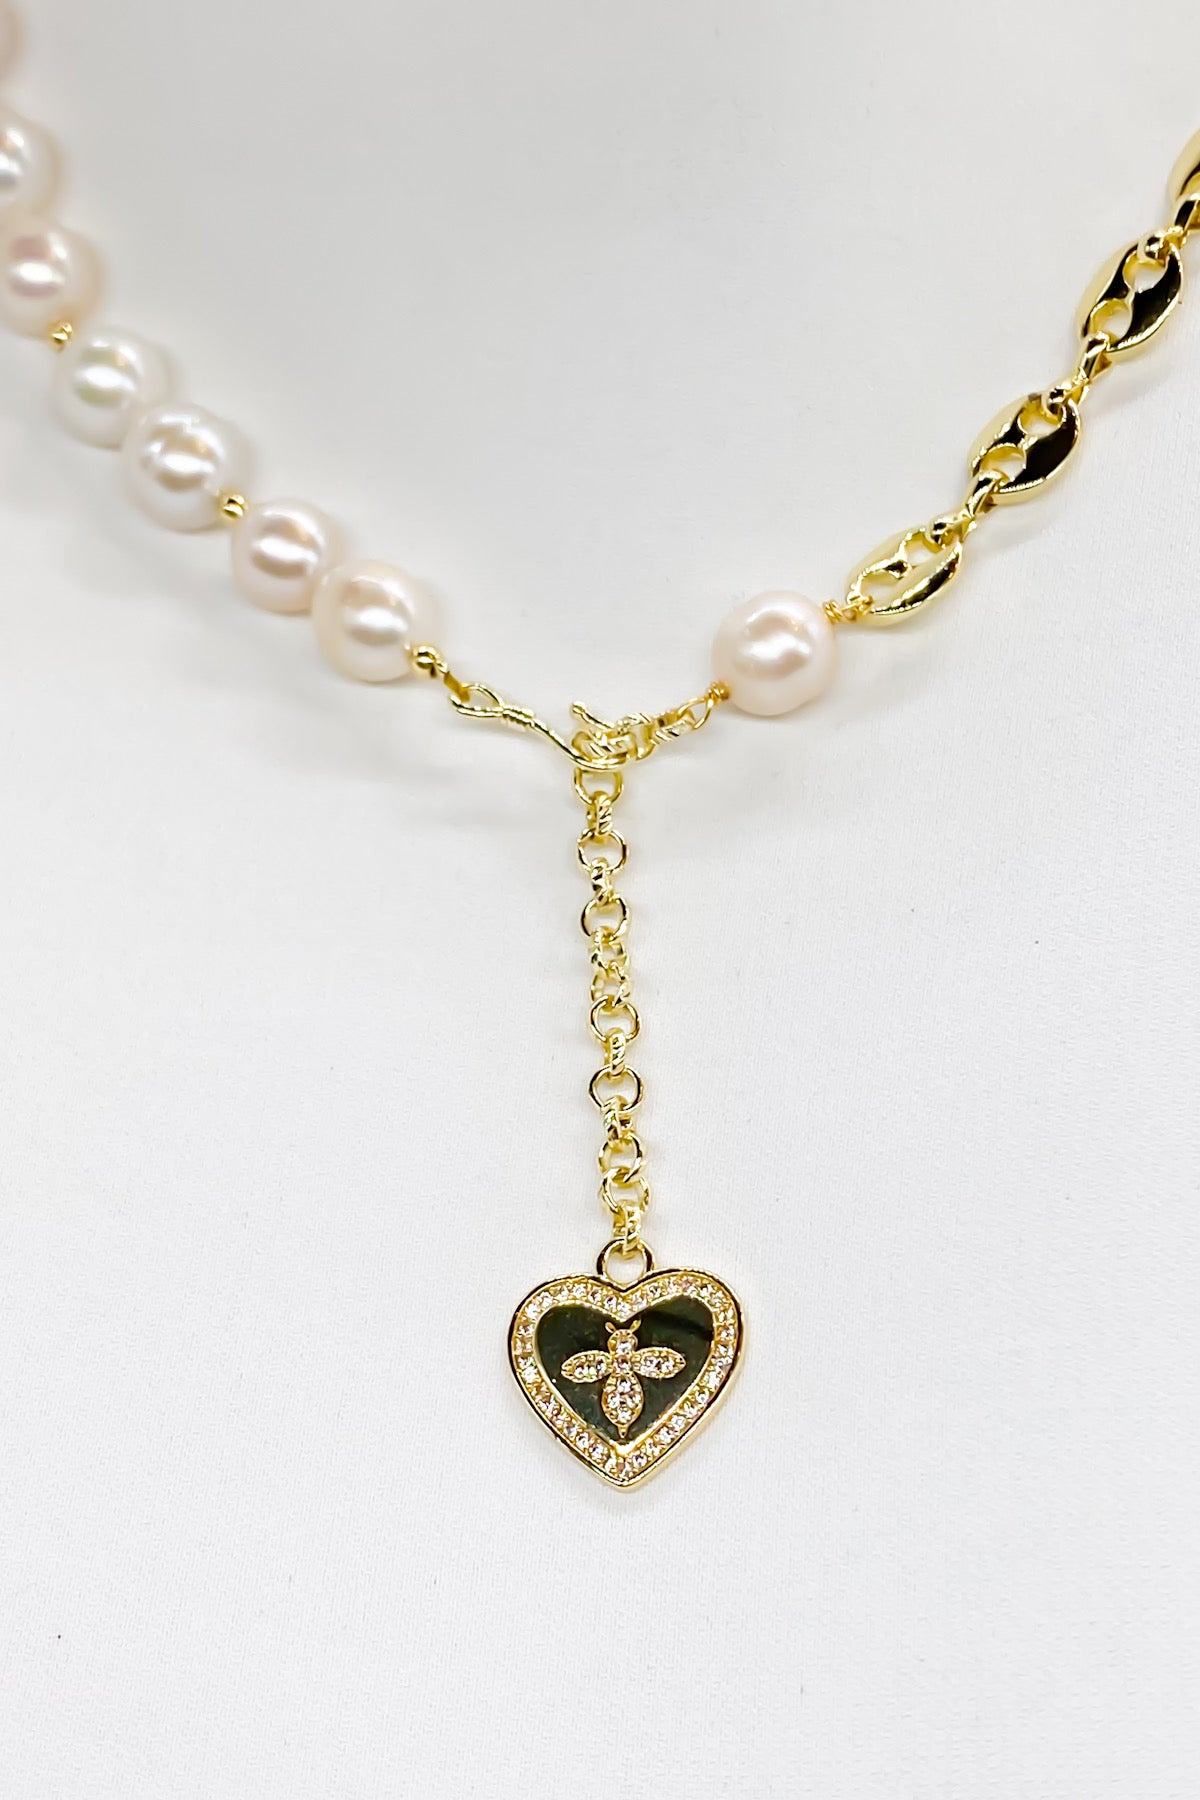 Chanel Necklace  Chanel Heart Pearl Necklace - the Vintage Advantages  Jewelry